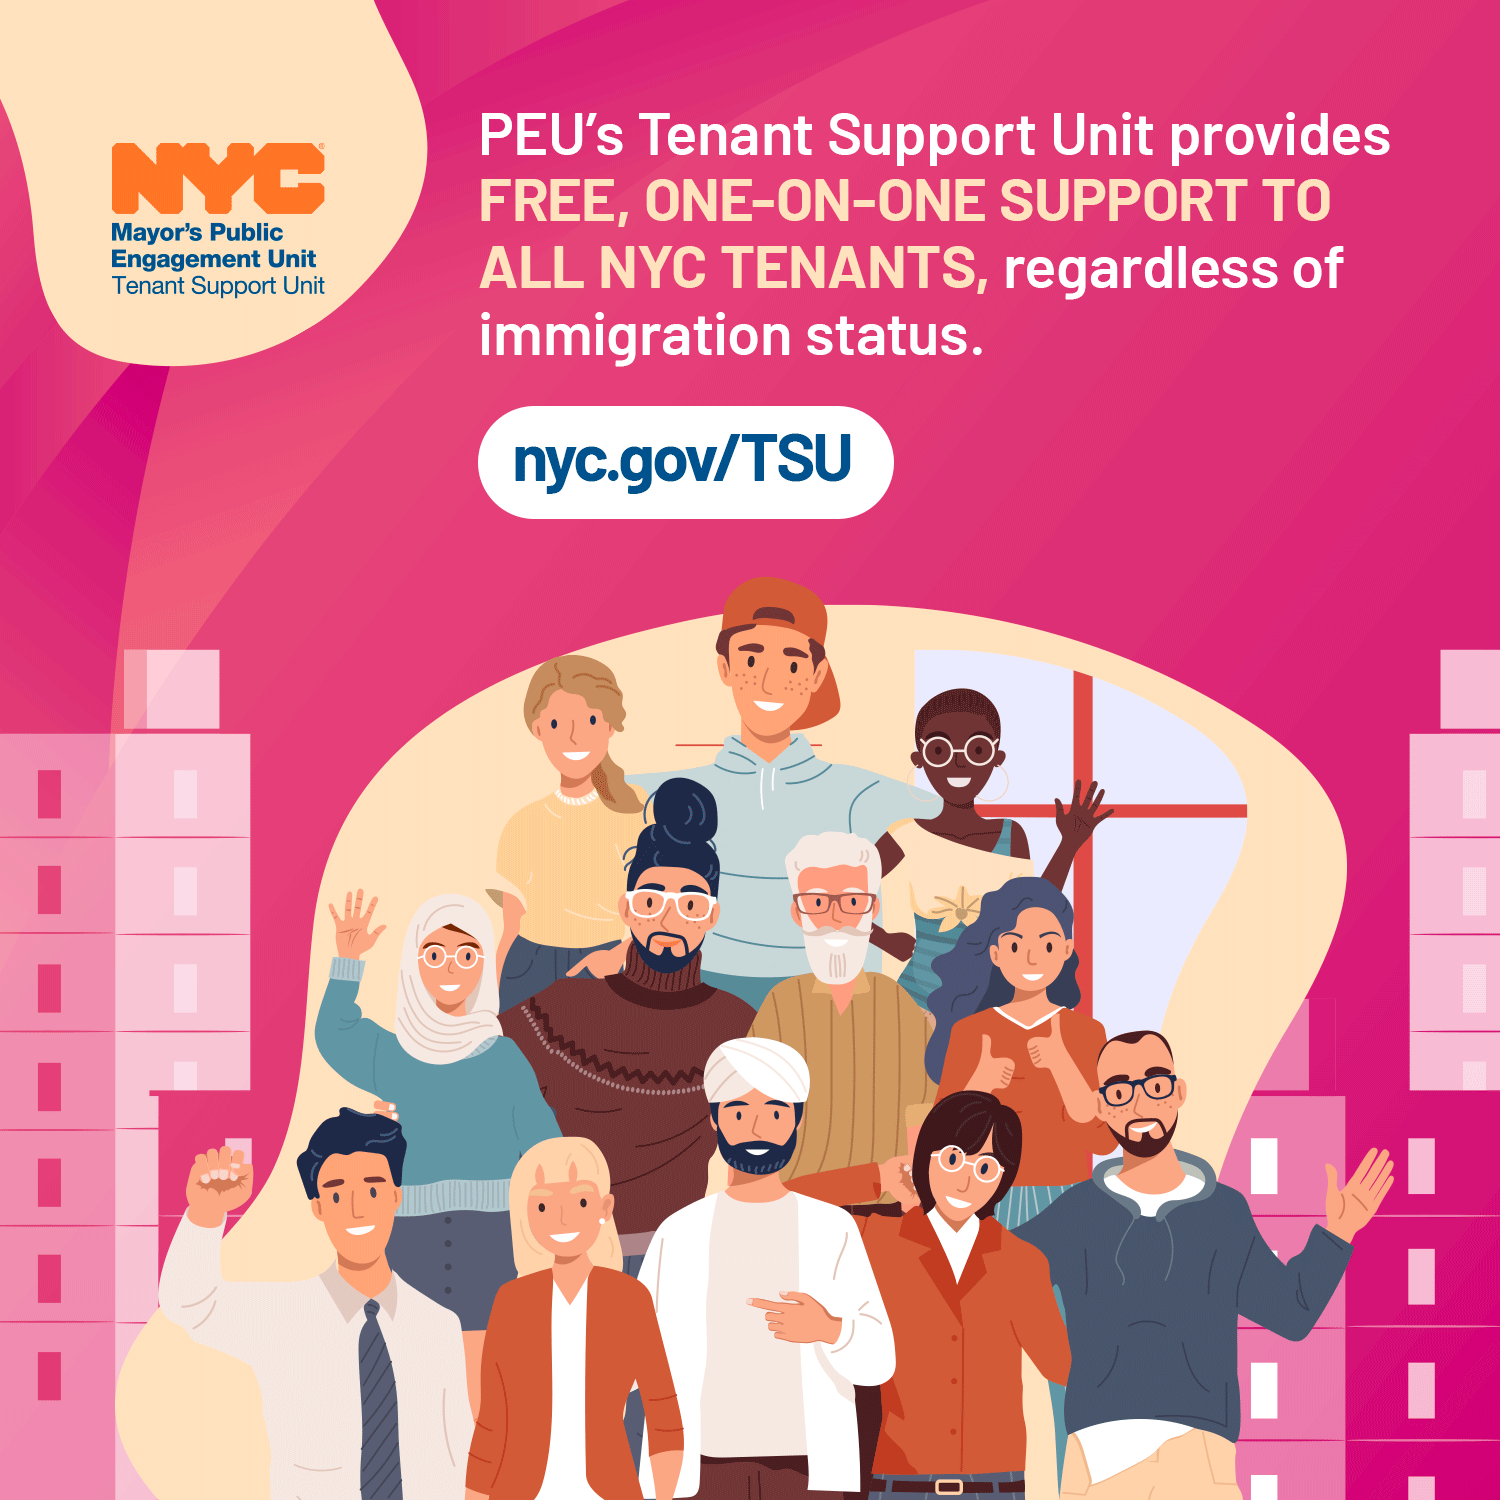 a NYC PEU logo and an illustration of a diverse group of people standing together.